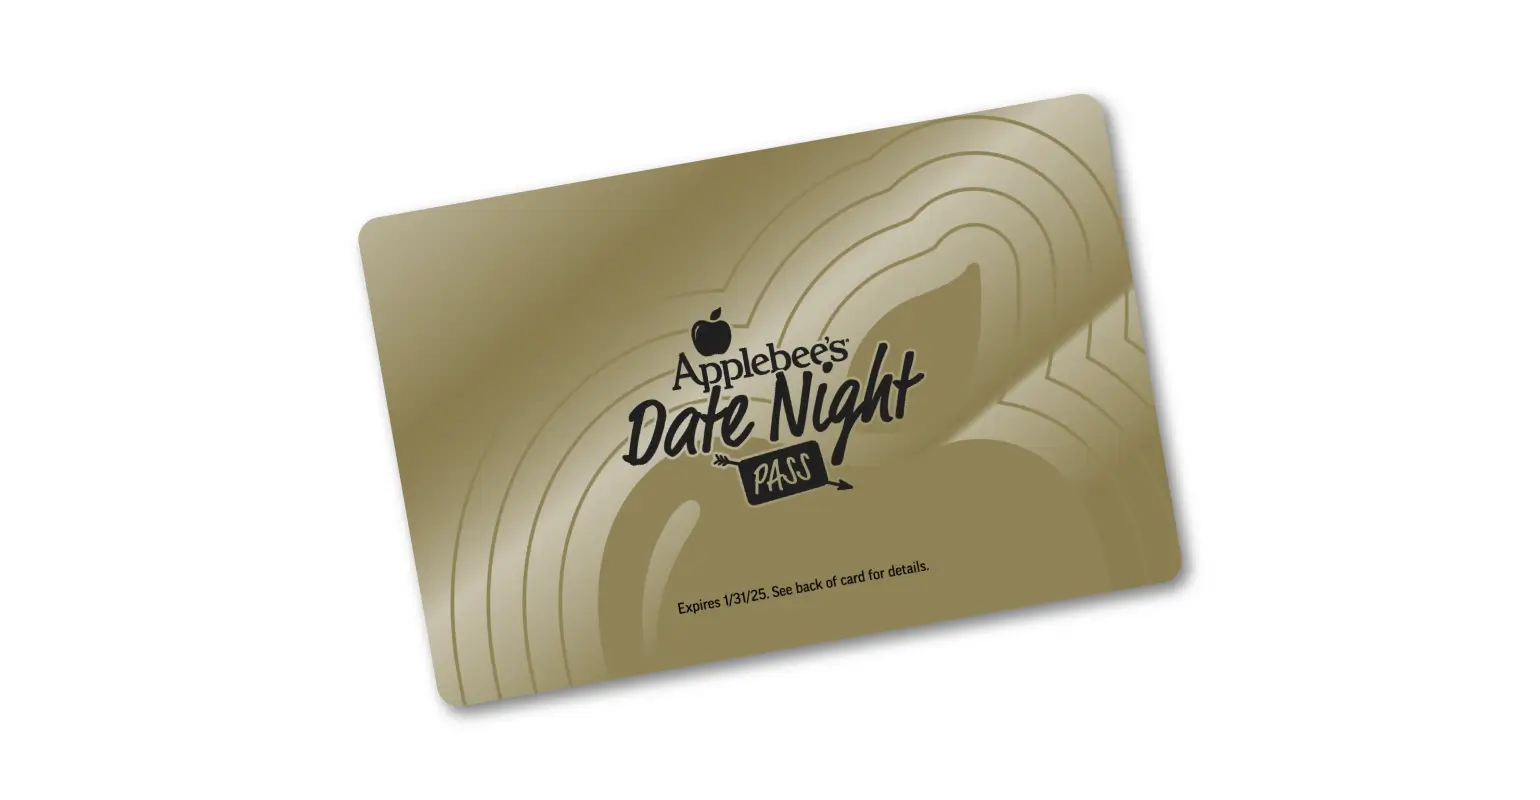 Experience Romance on a Budget with Applebee’s Date Night Pass